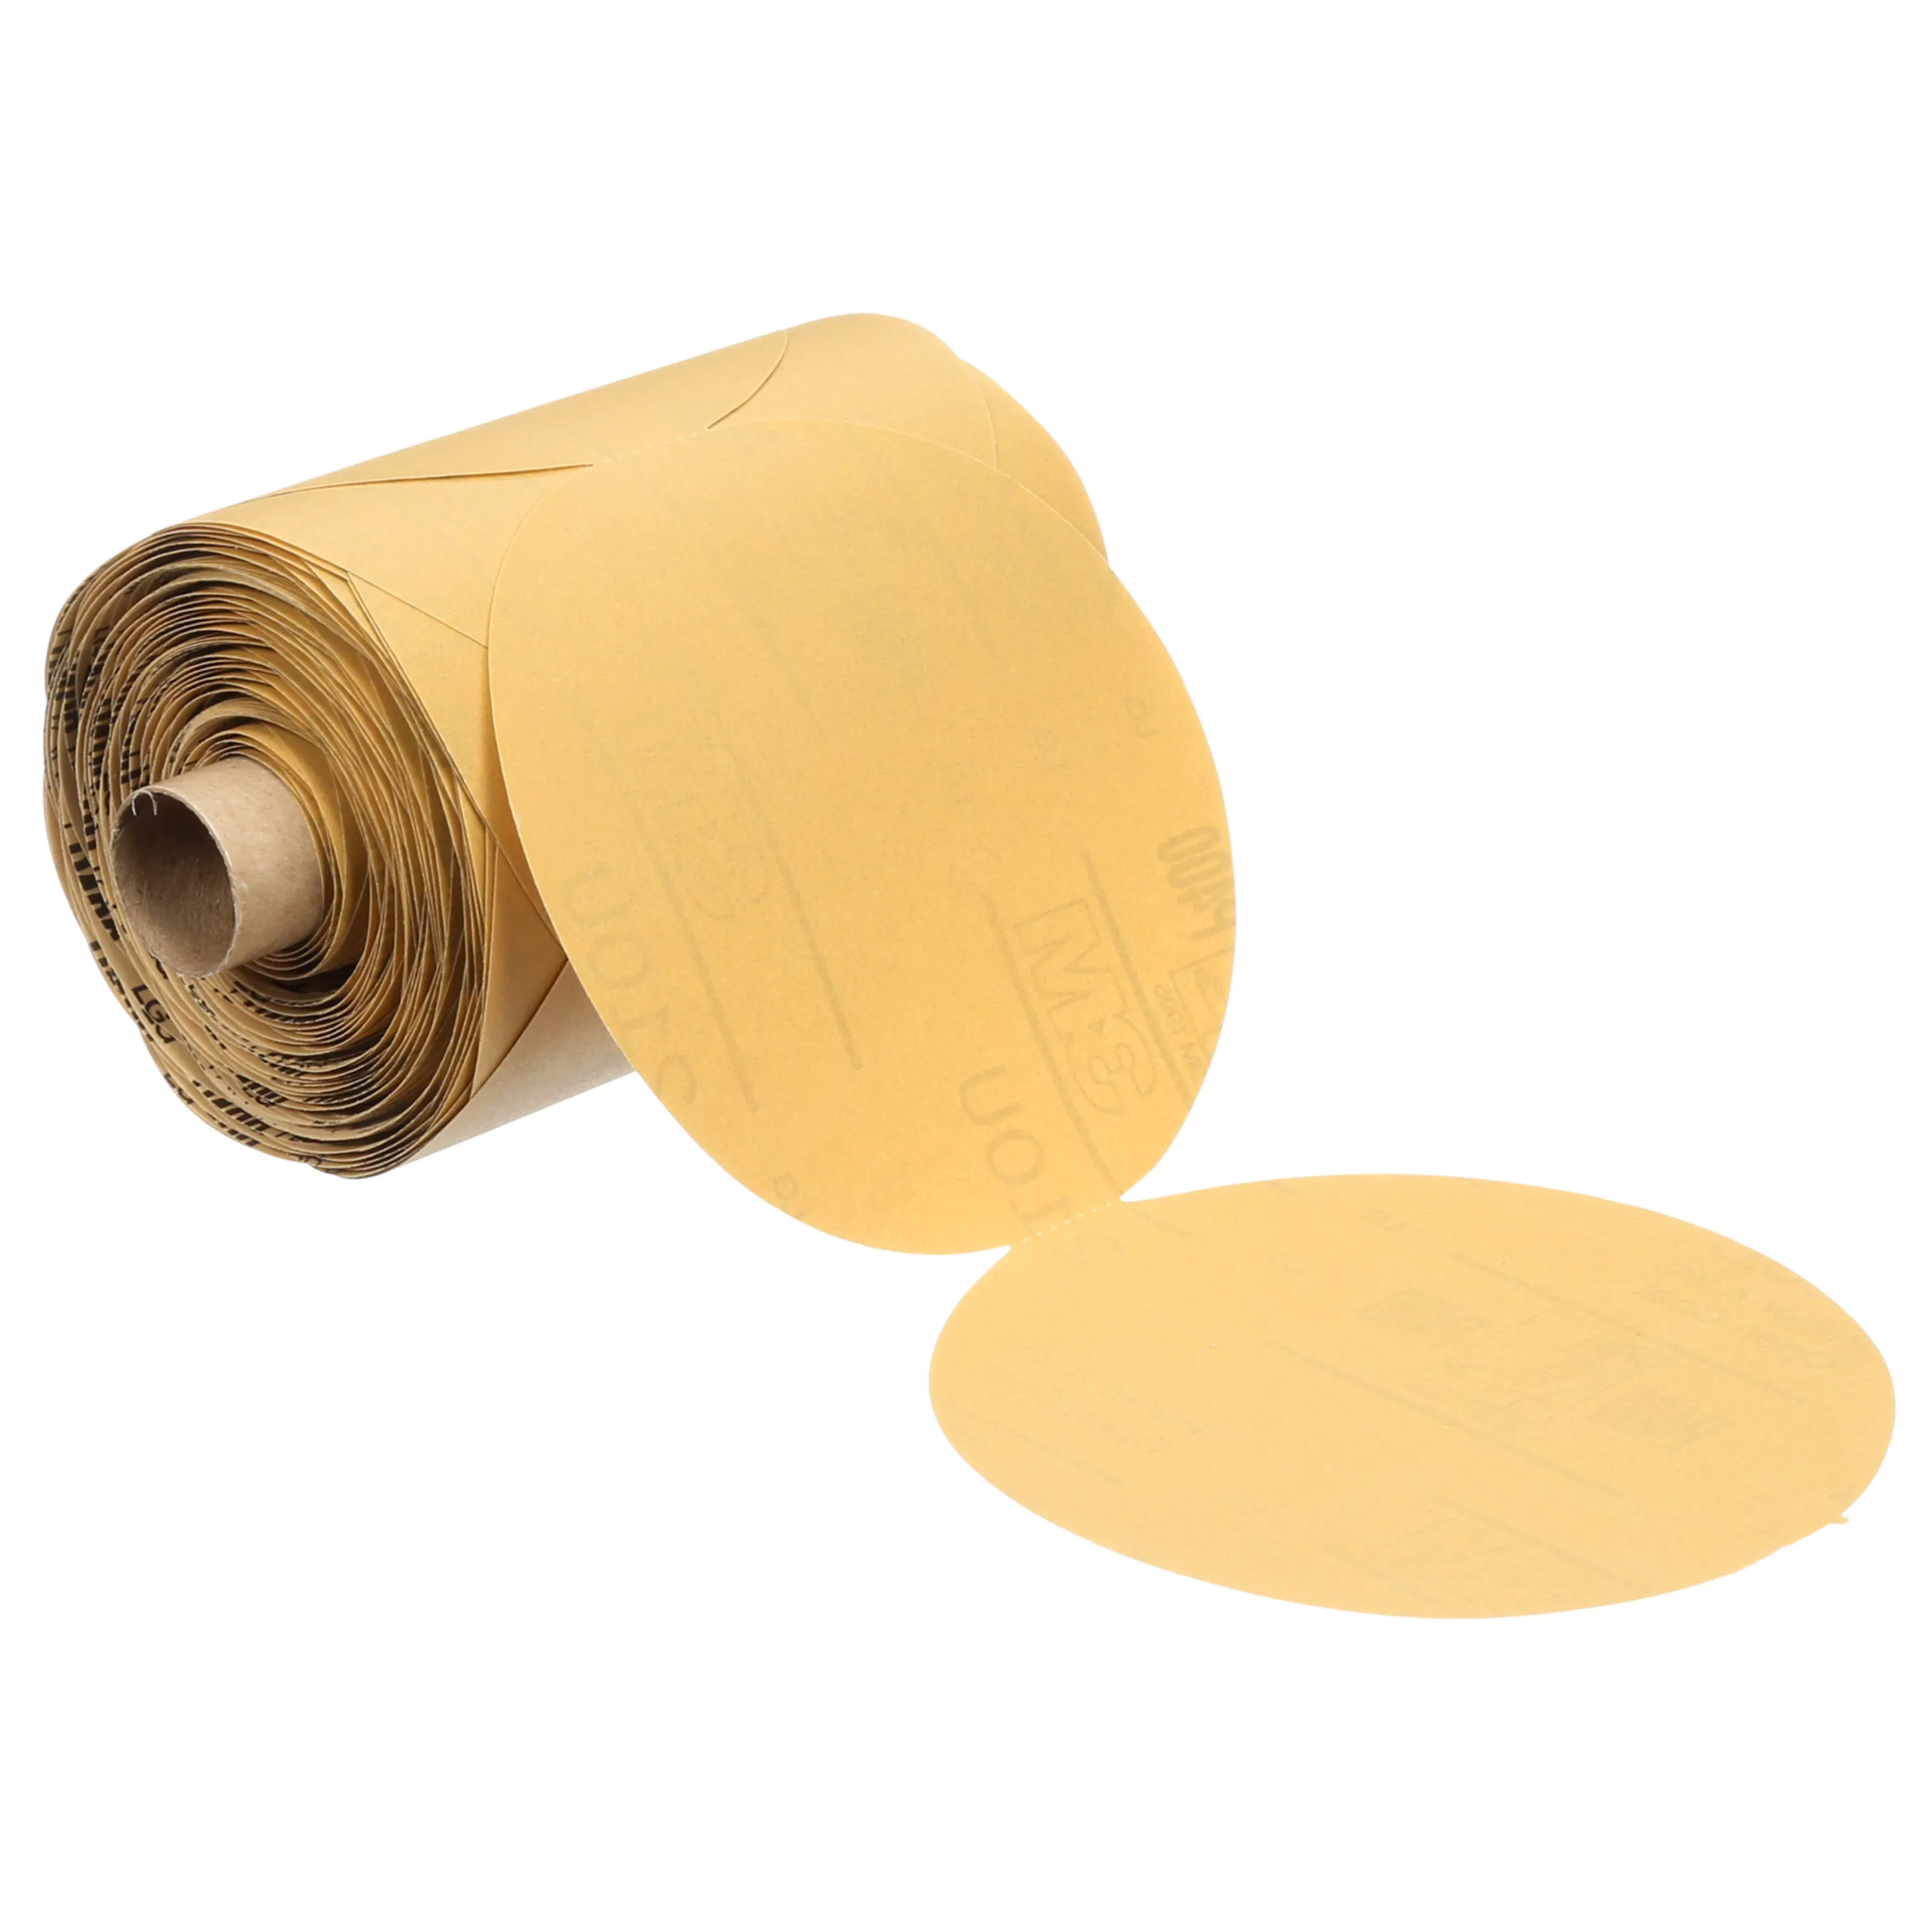 3M™ Stikit™ Paper Disc Roll 210U, P320 A-weight, 5 in x NH, Linered, Die 500X, 250 Discs/Roll, 4 Rolls/Case